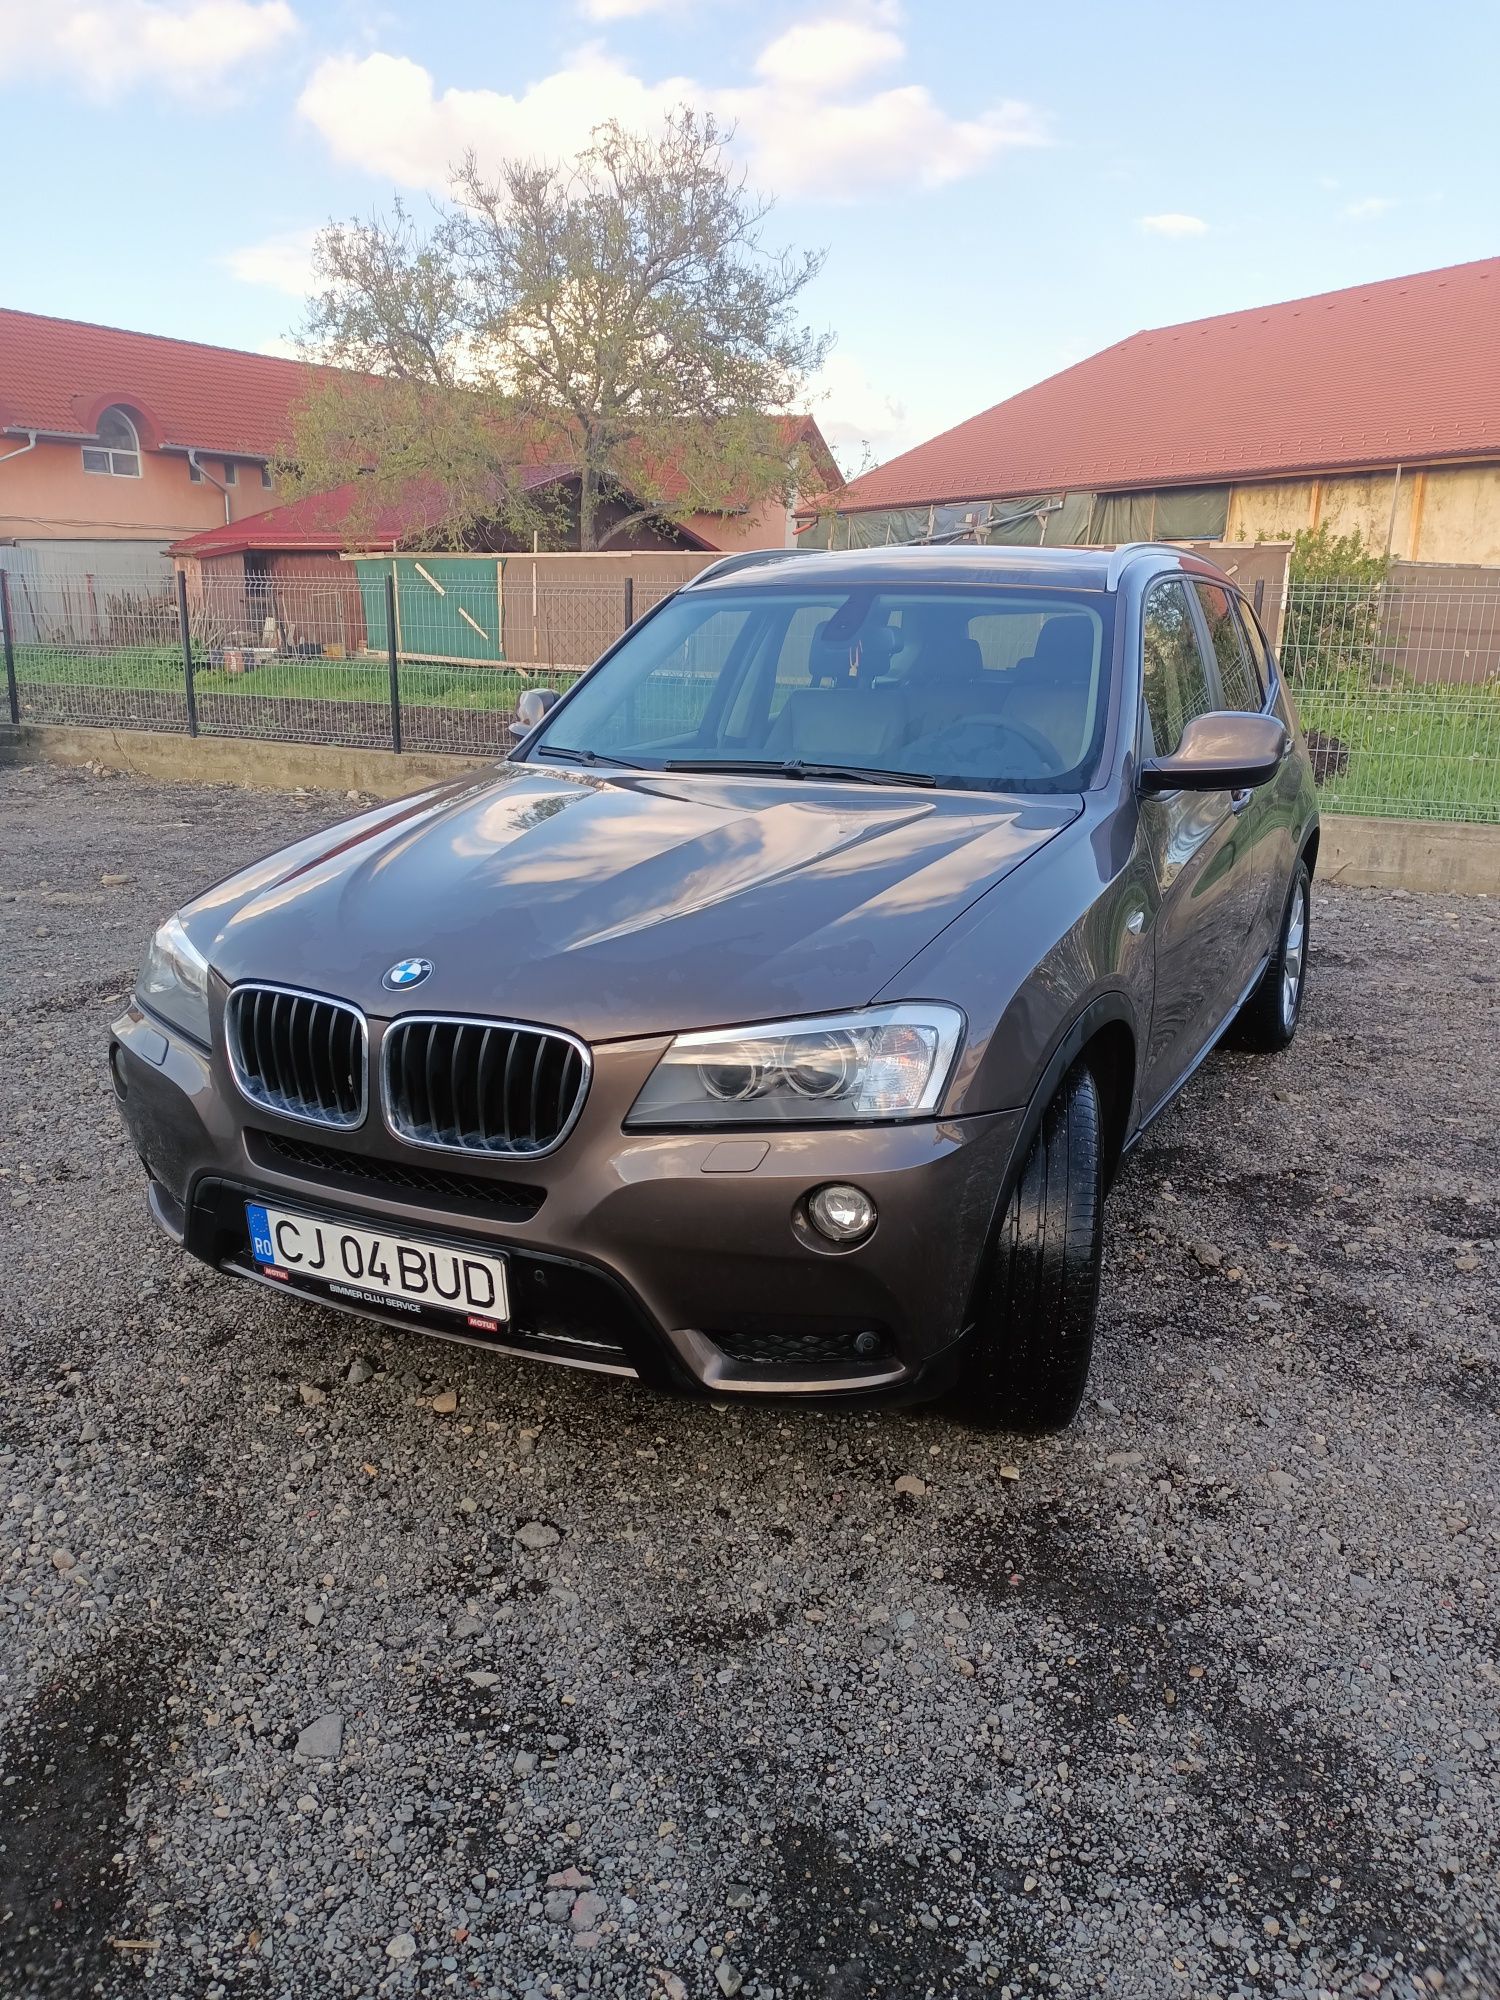 Vand x3 xdrive automat anul 2011 ofer raport carVertical si Istoric